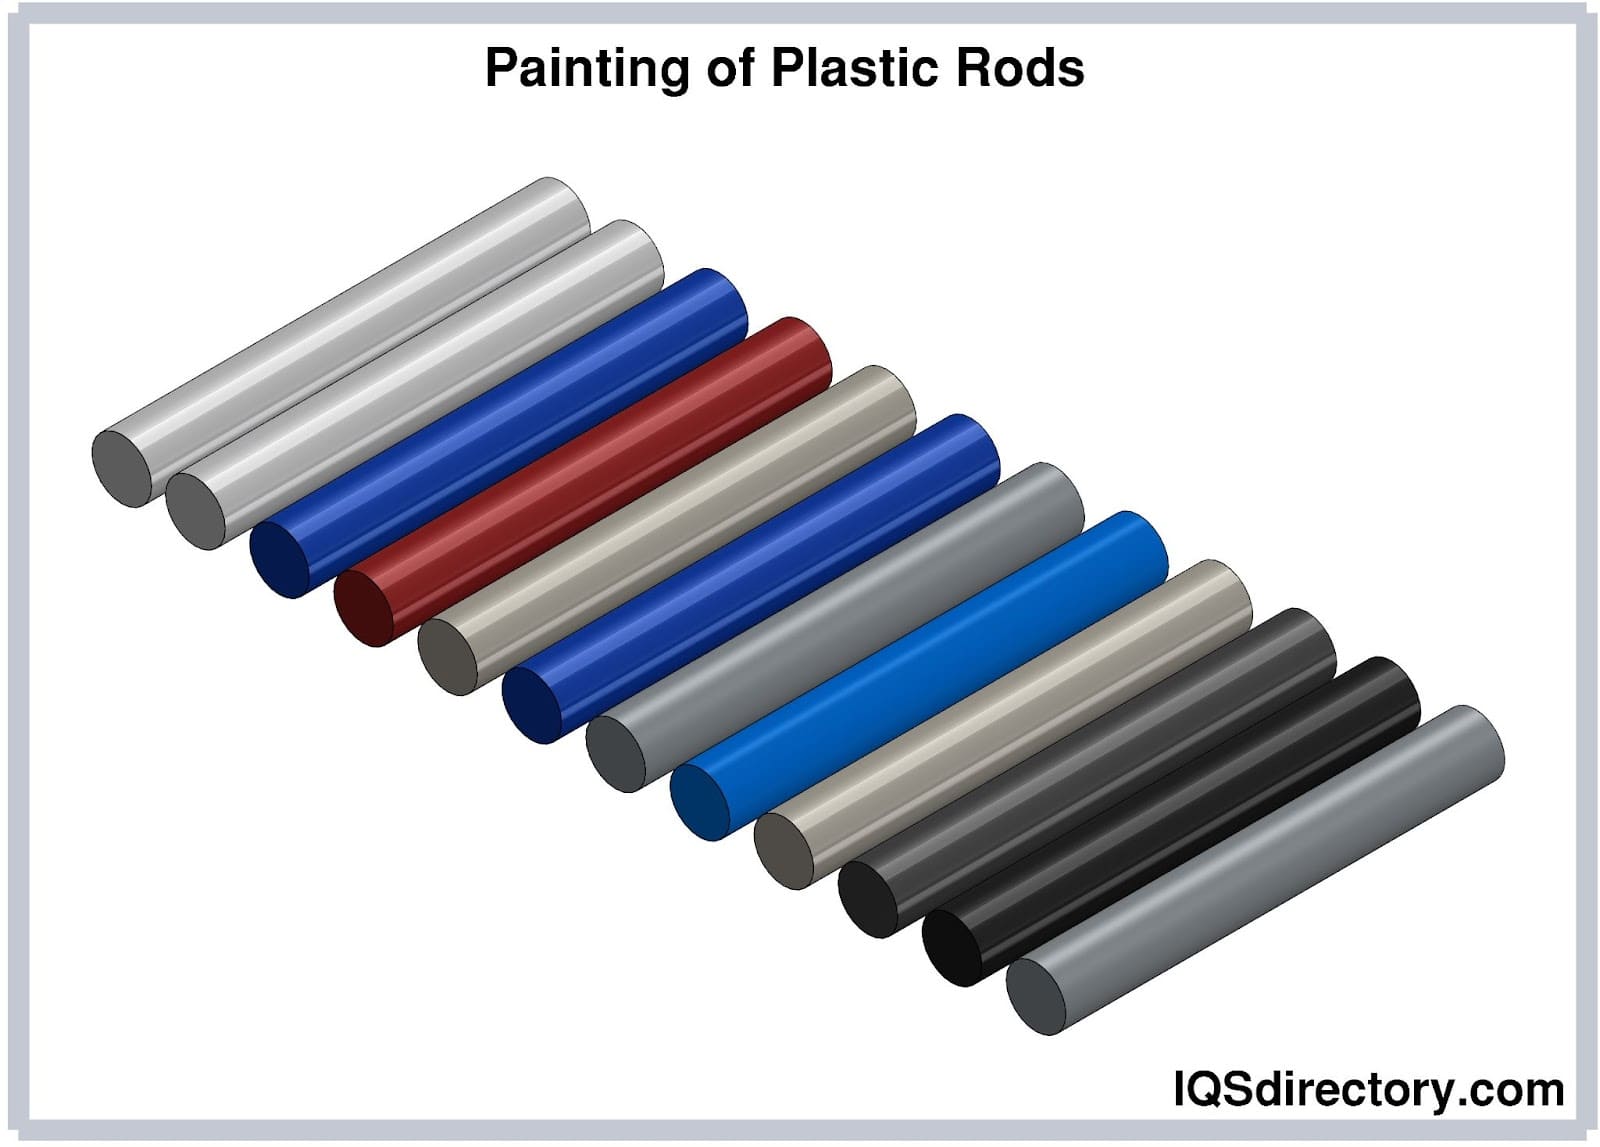 Plastic materials: Types, composition and uses